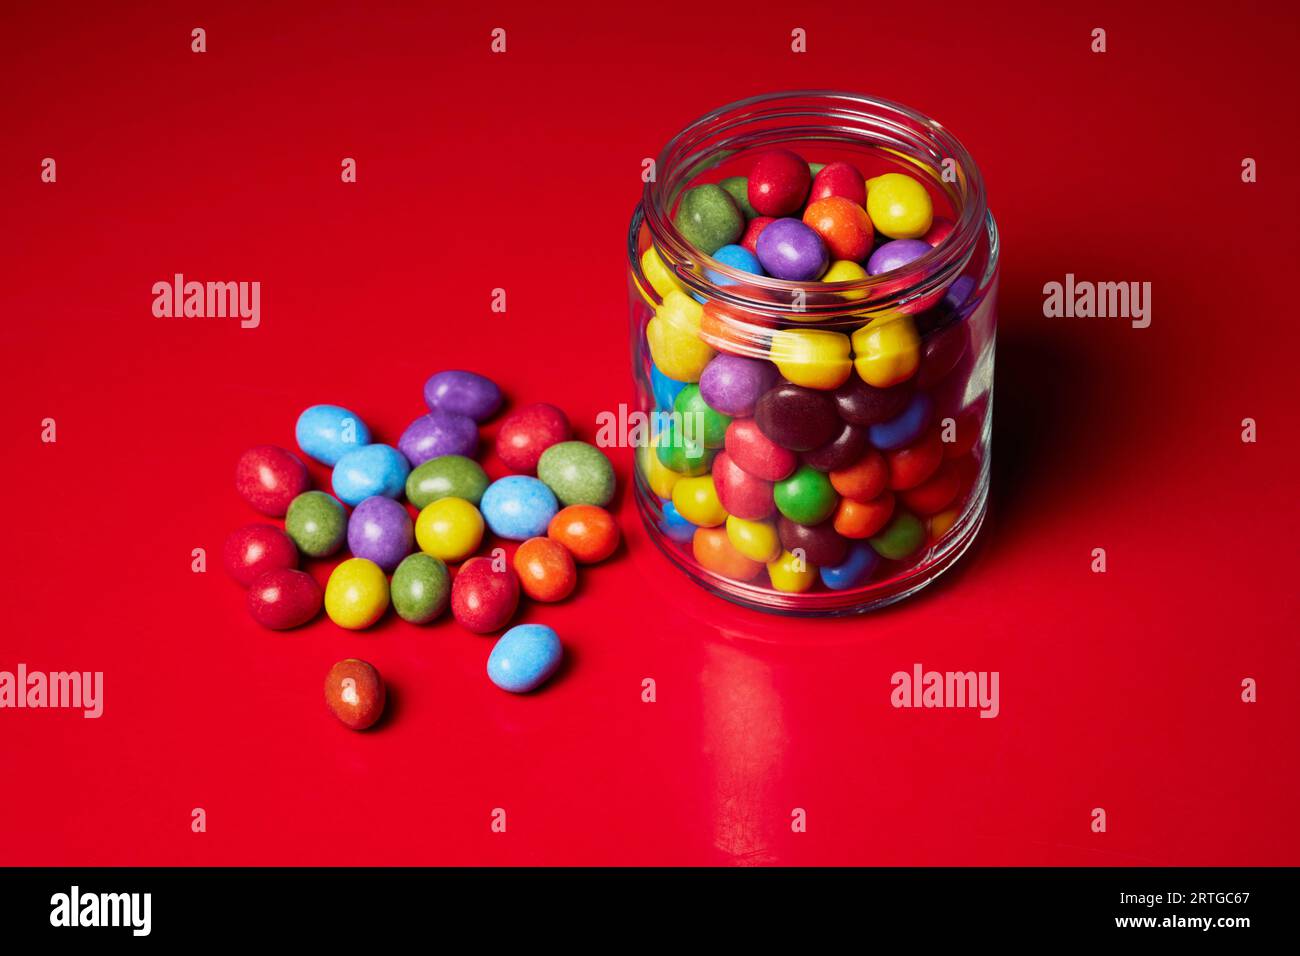 Still life multicolored candy in glass jar on red background Stock Photo